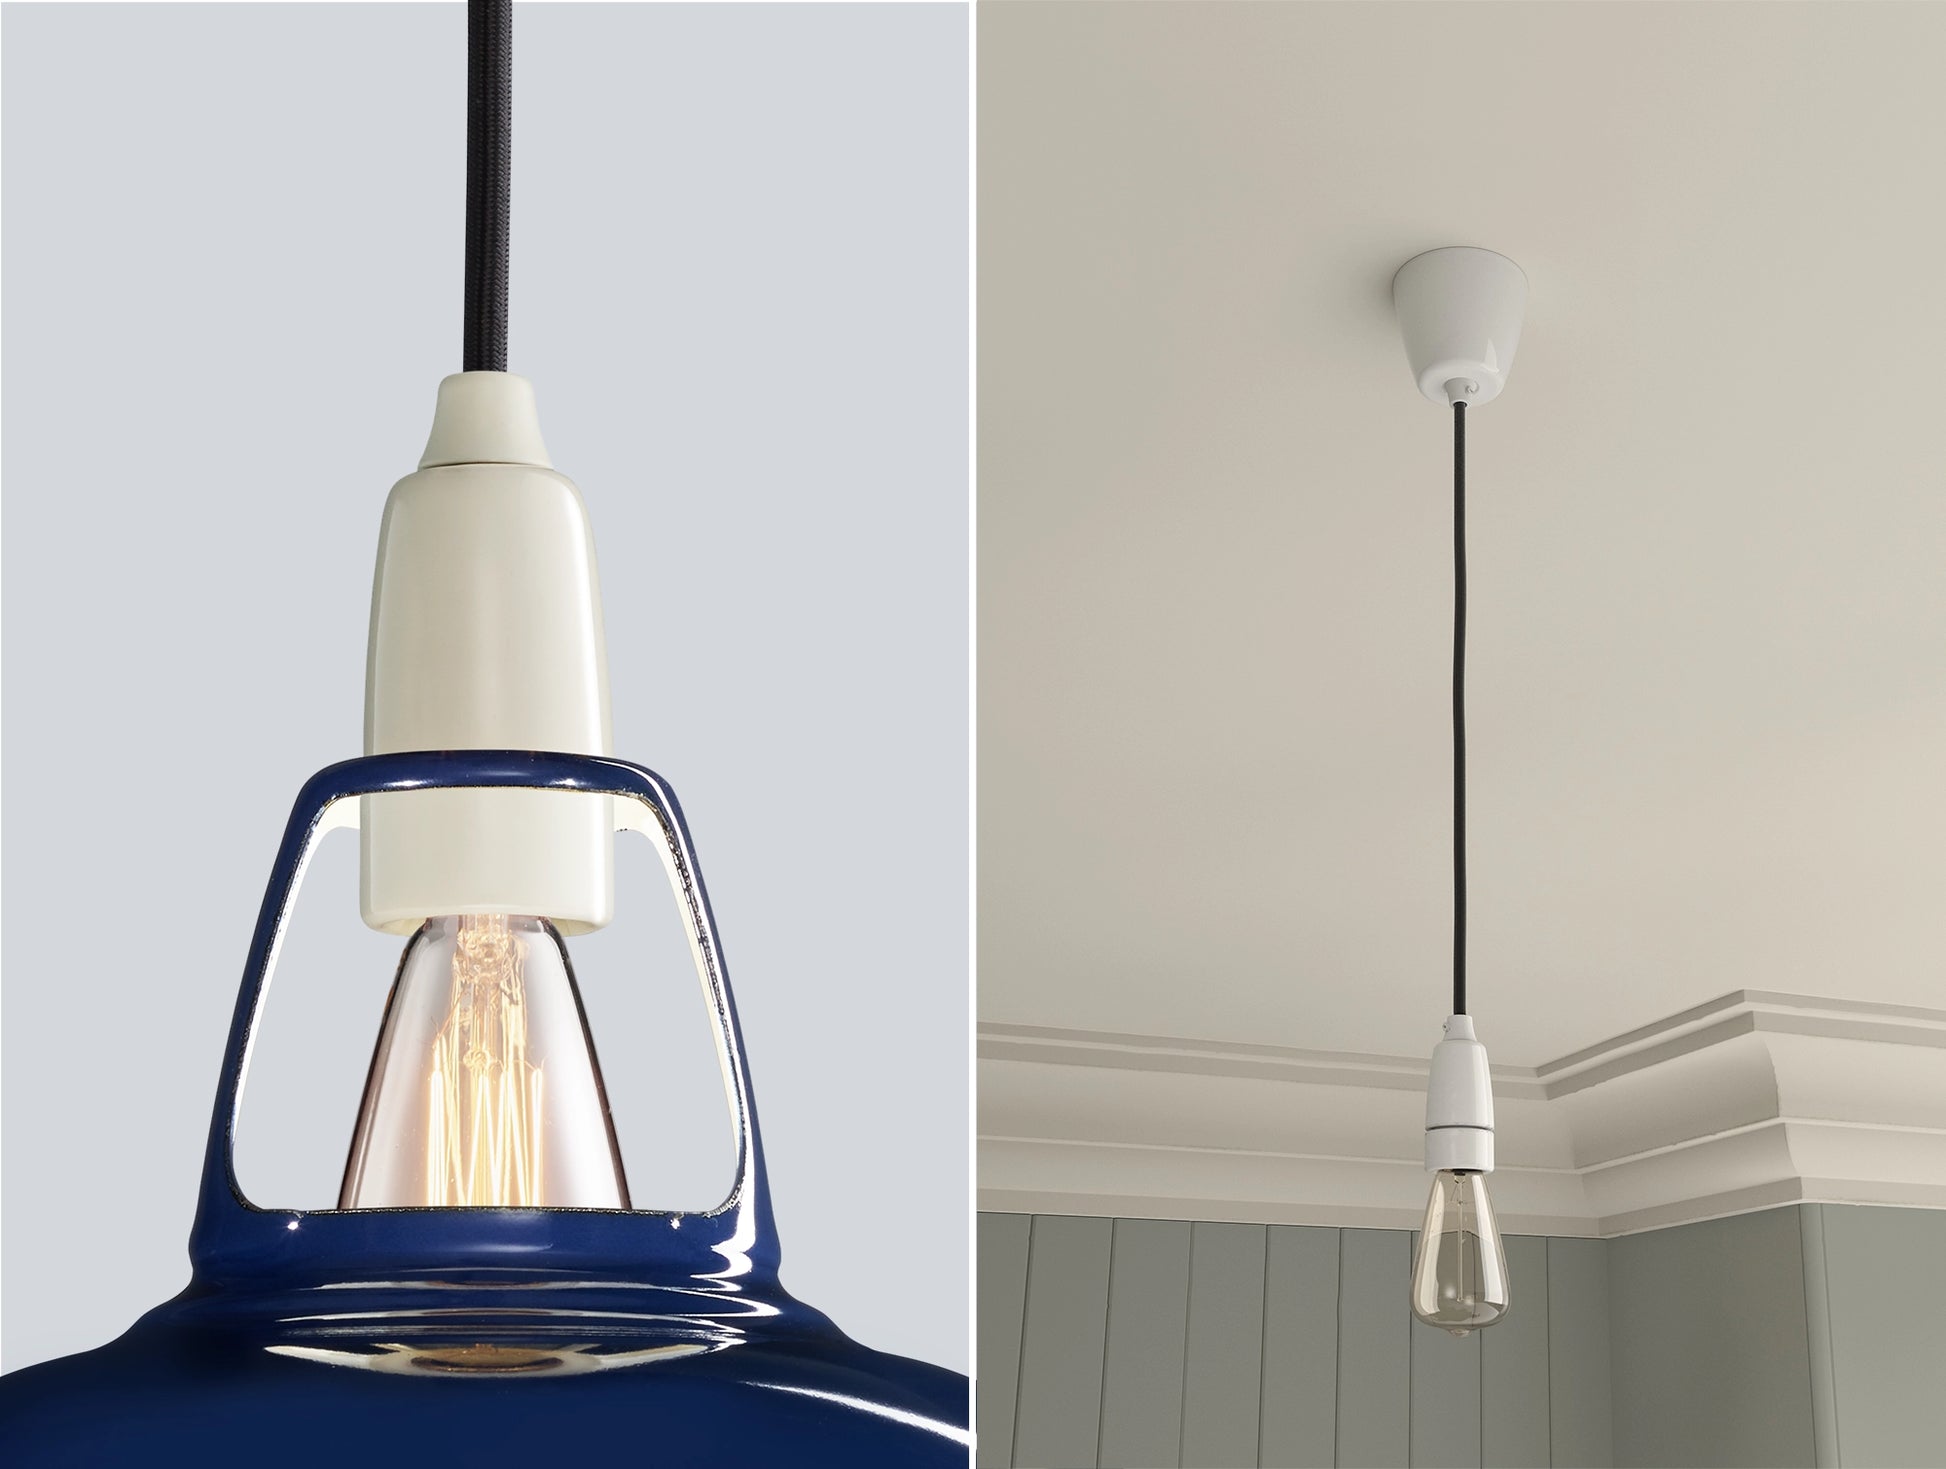 Close up of an E14 Porcelain suspension set on a Royal Blue lampshade on the left. On the right, an E14 Porcelain pendant set with a lightbulb is hanging from the ceiling